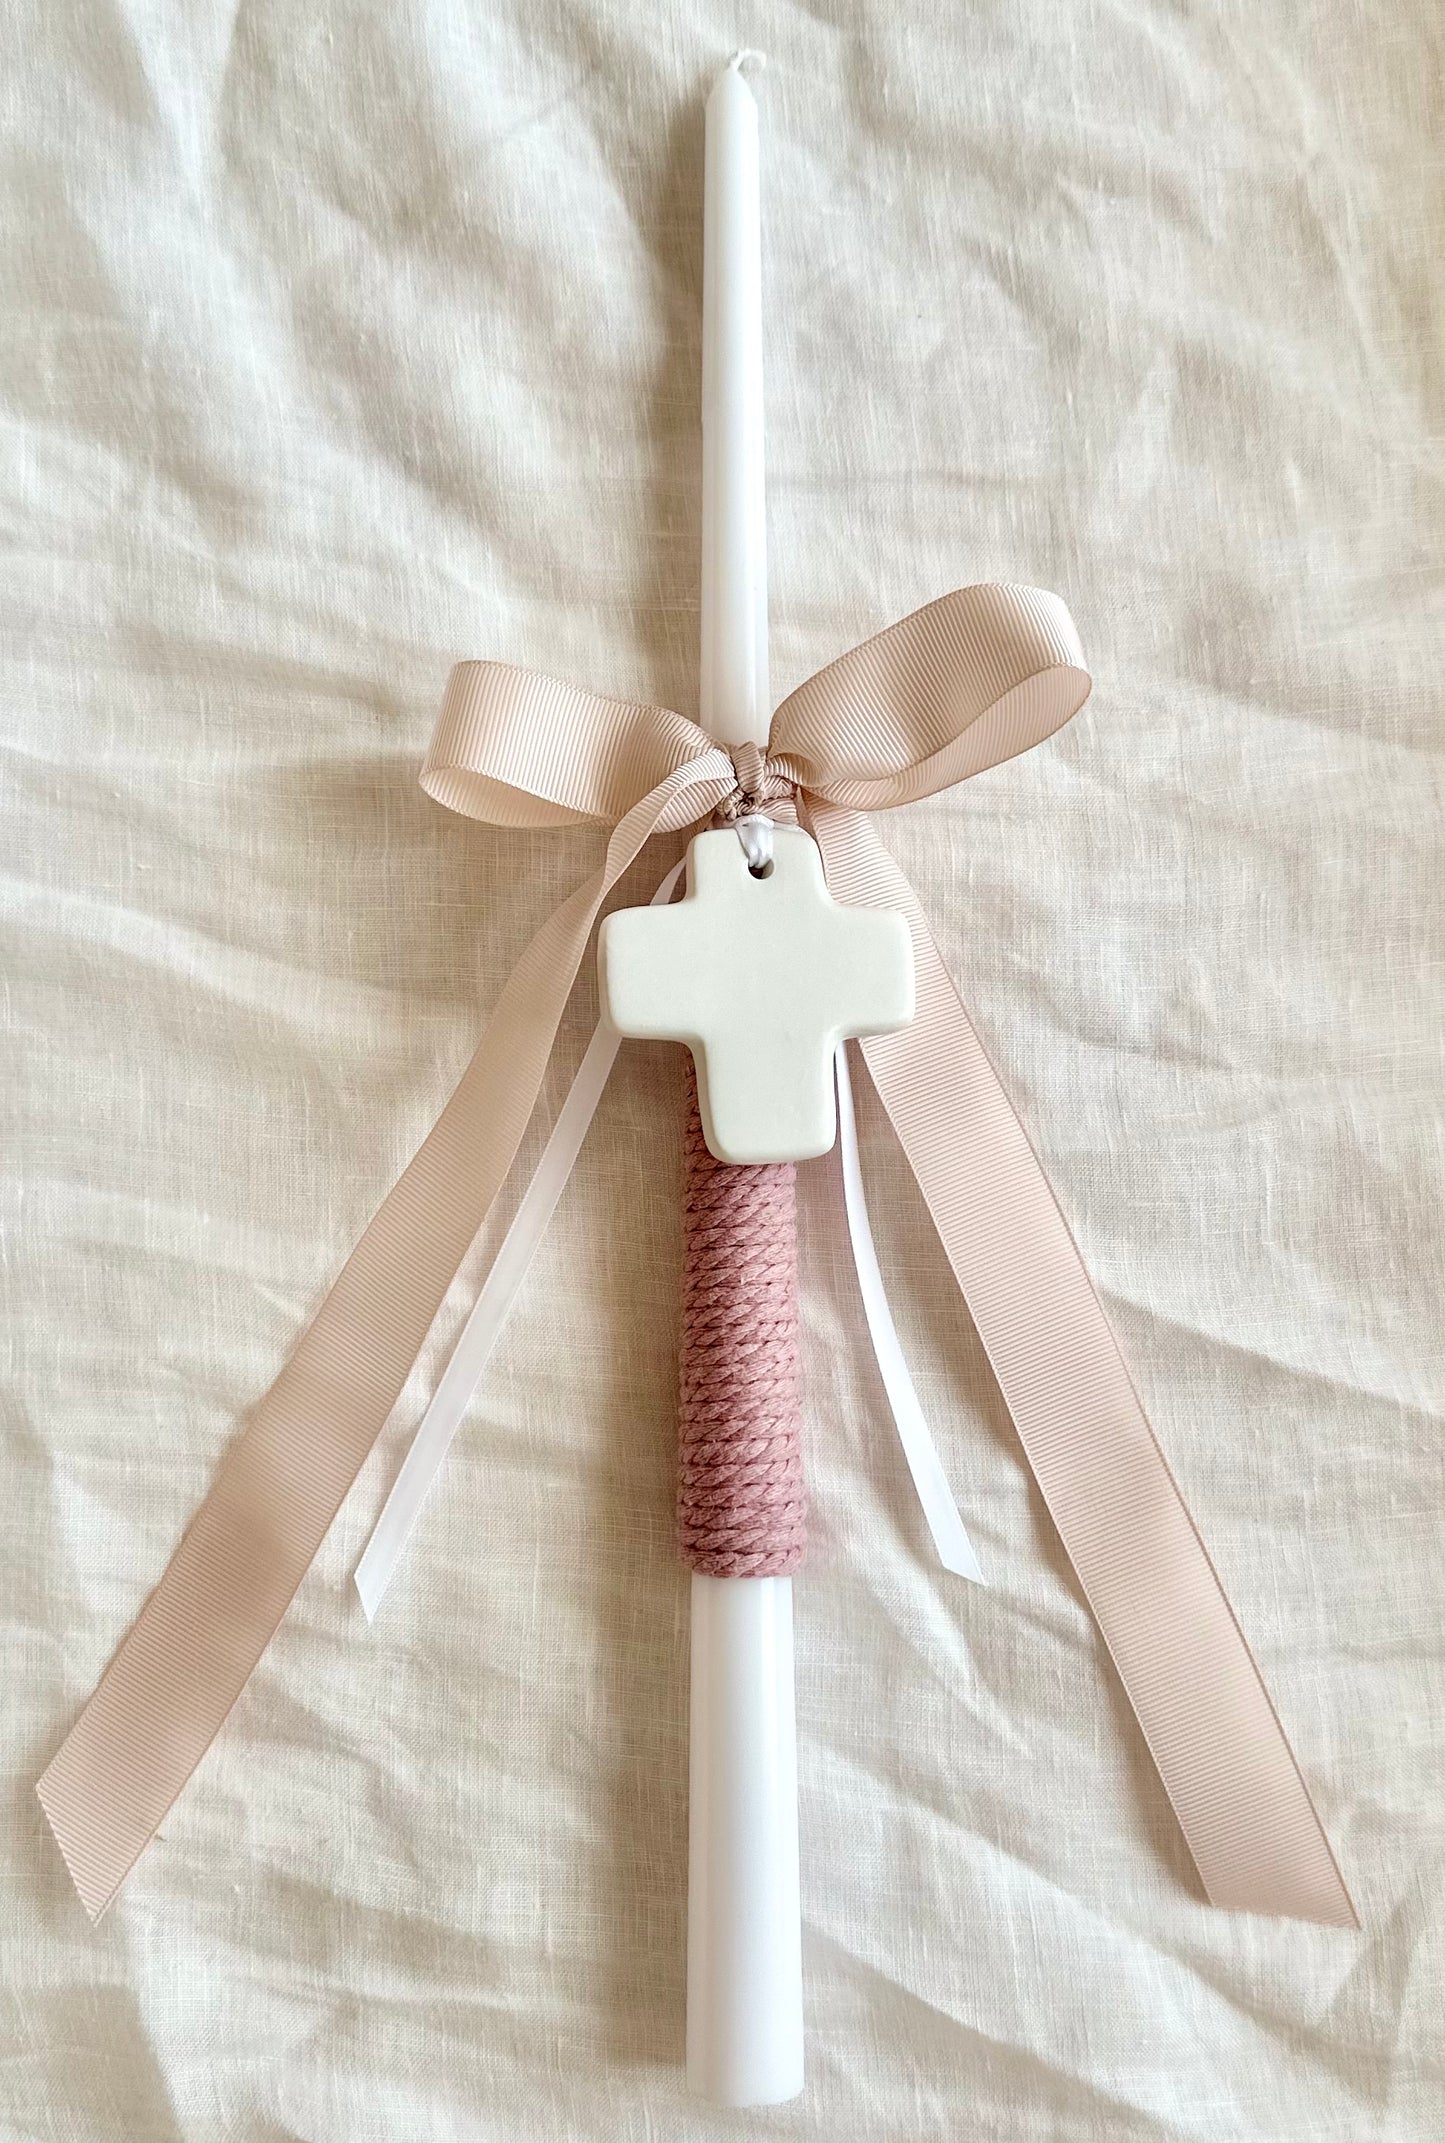 White and Pink Tapered Easter Candle with White Cross